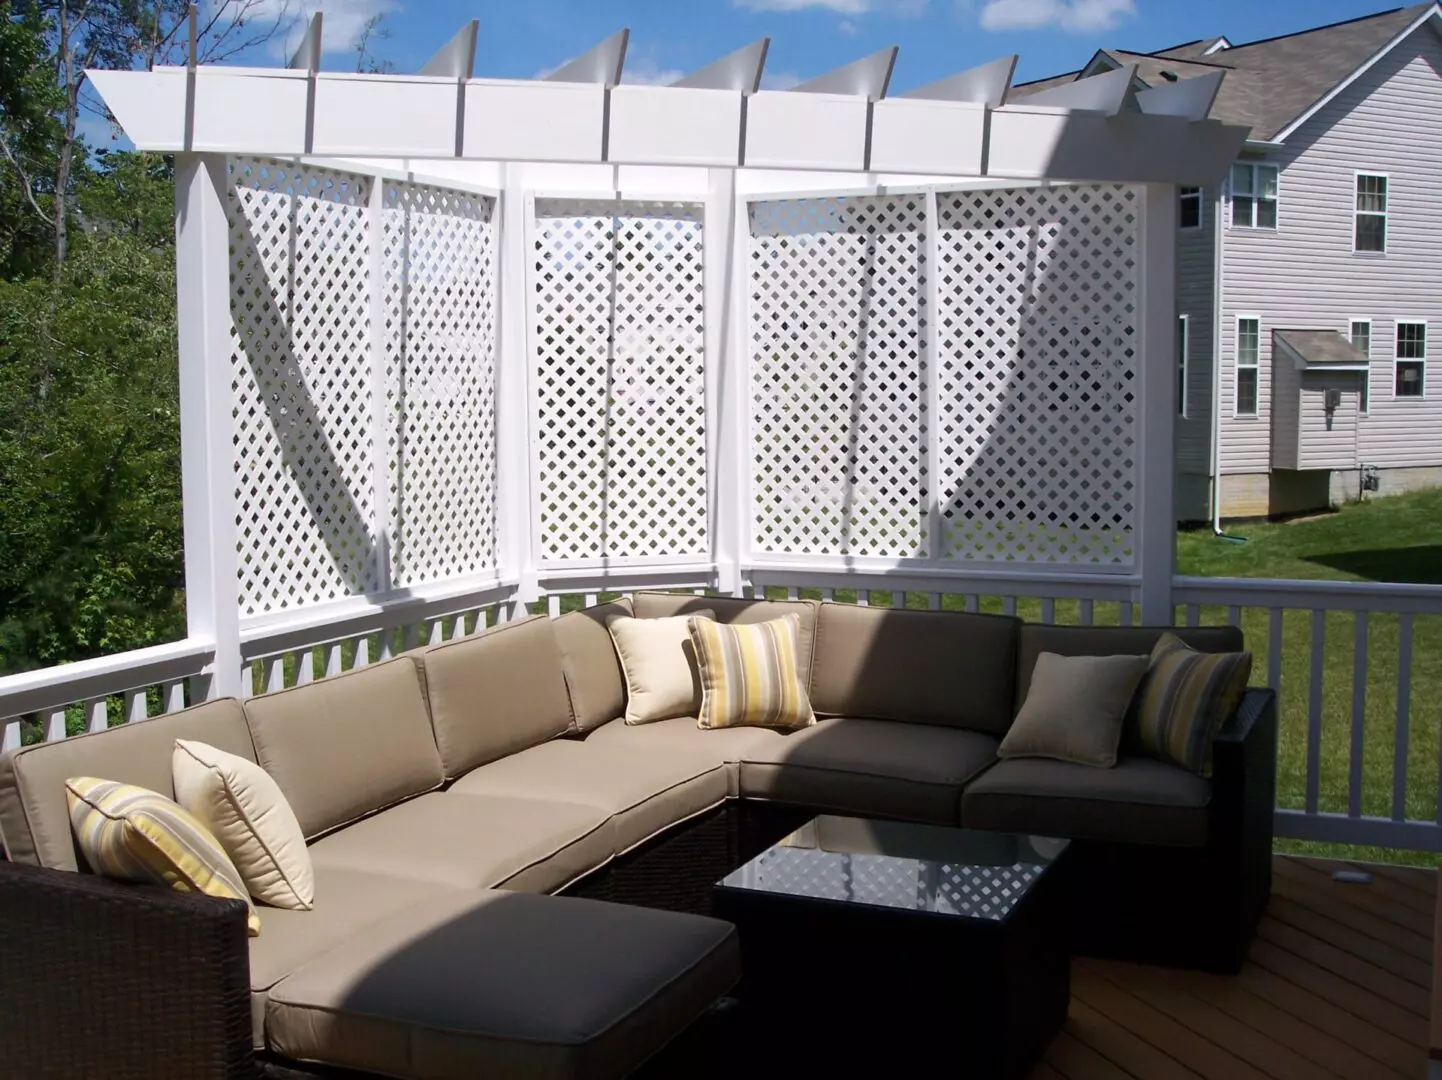 A deck with a brown couch and white pergola